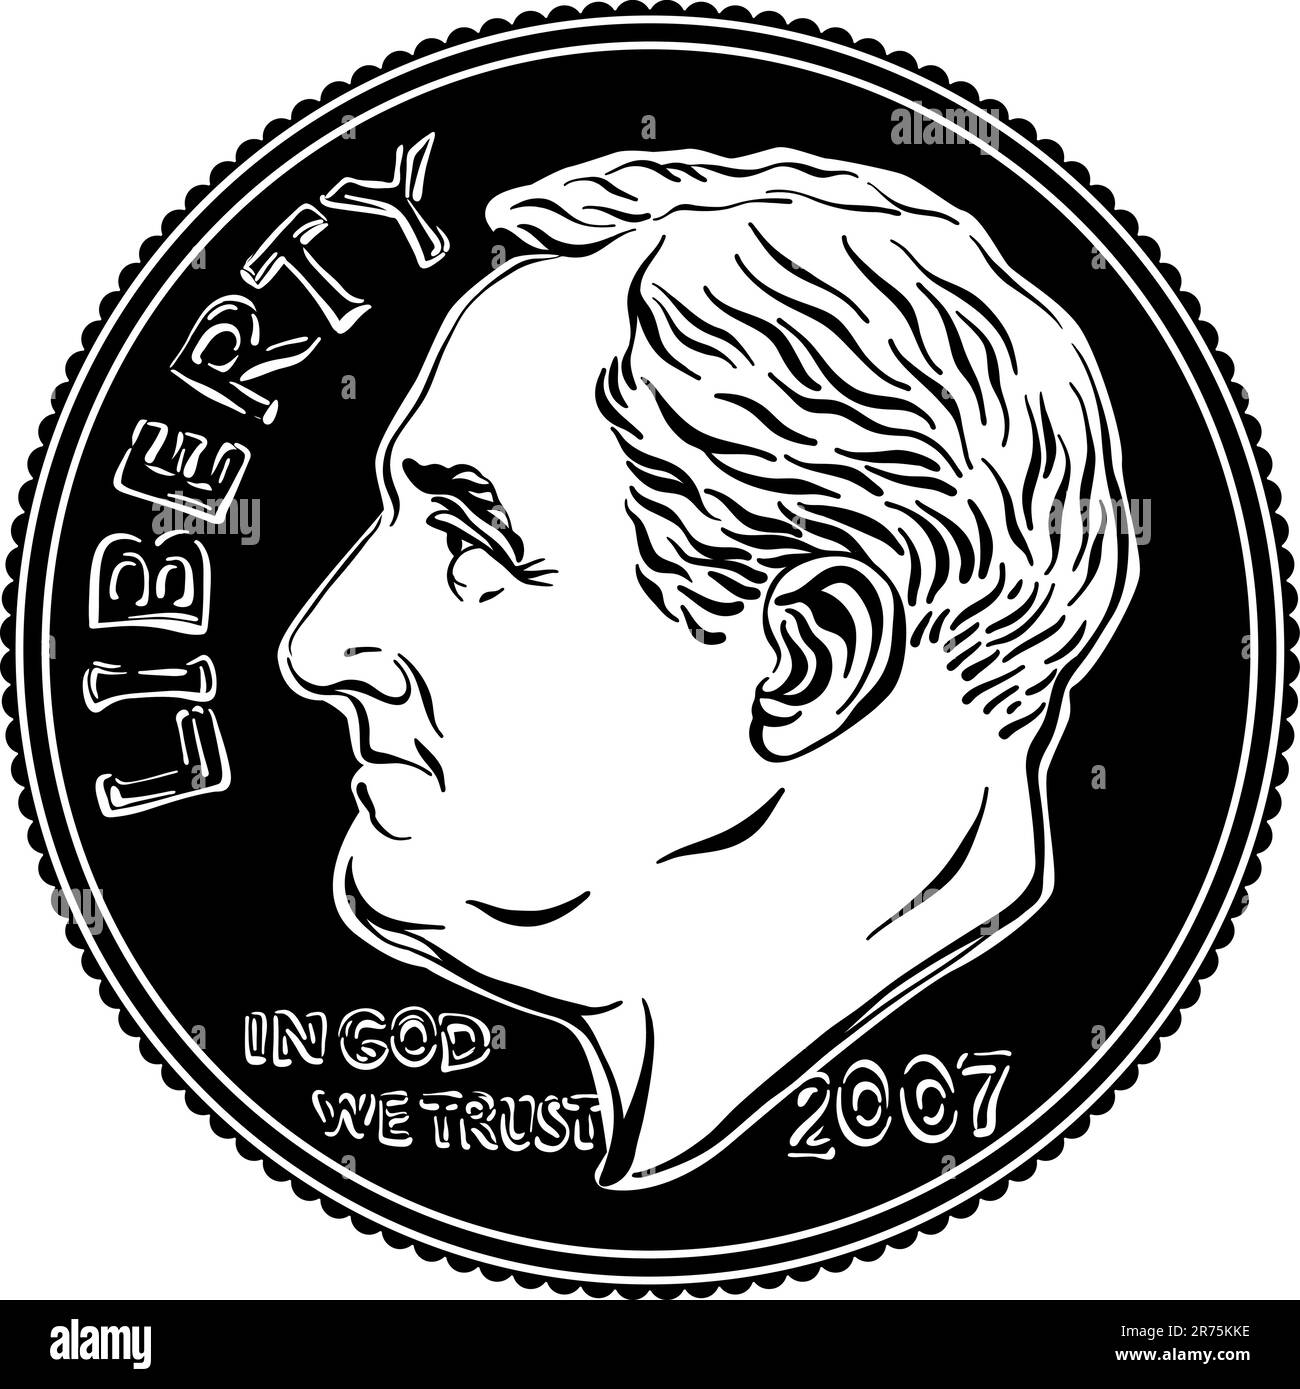 American money Roosevelt dime, United States one dime or 10-cent silver coin with President Franklin D Roosevelt on obverse. Black and white image Stock Vector